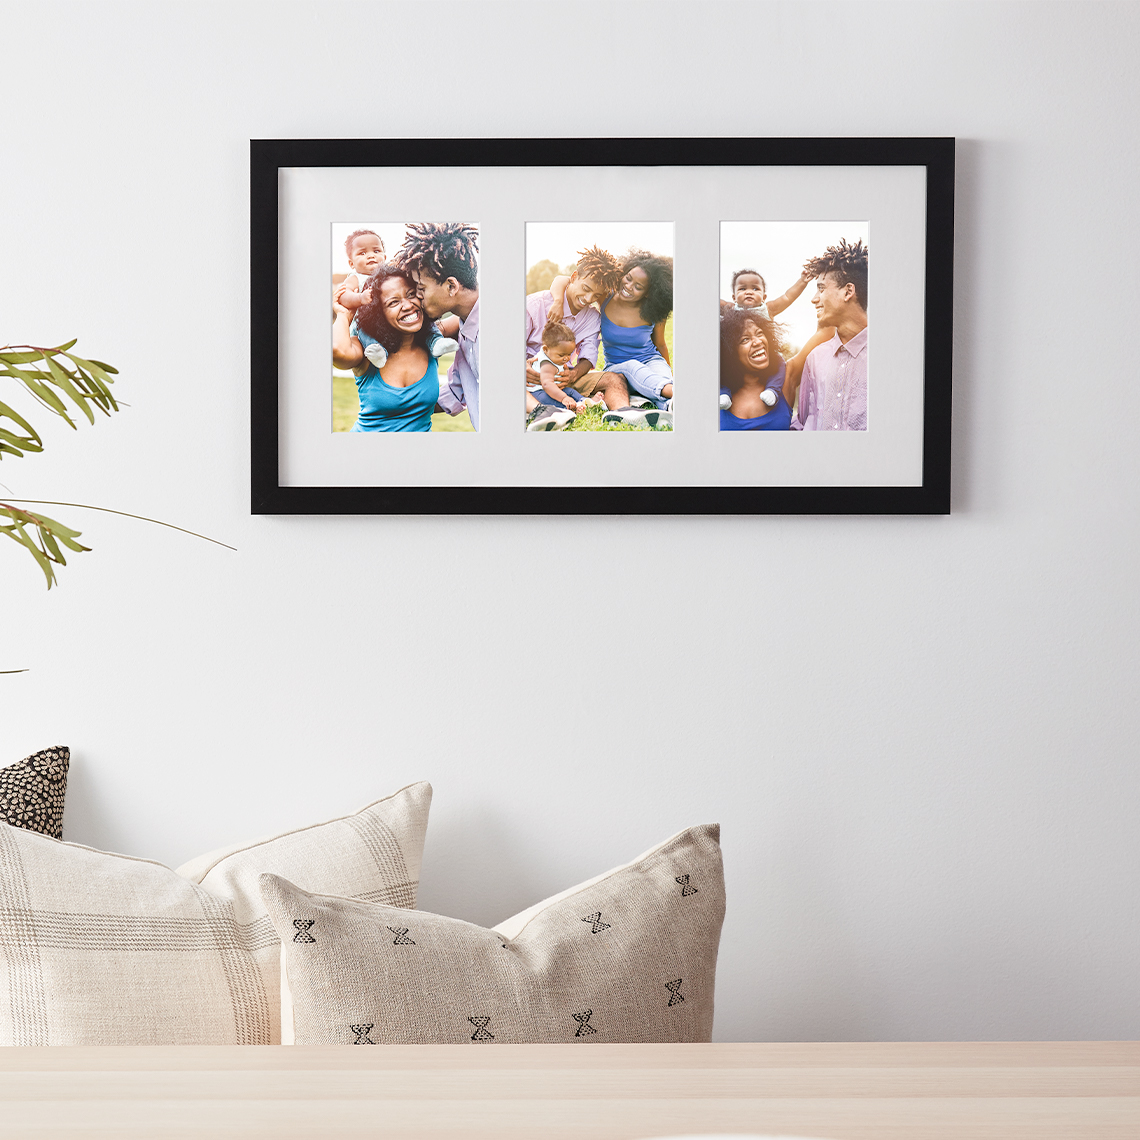 Framed Photo Prints - Small